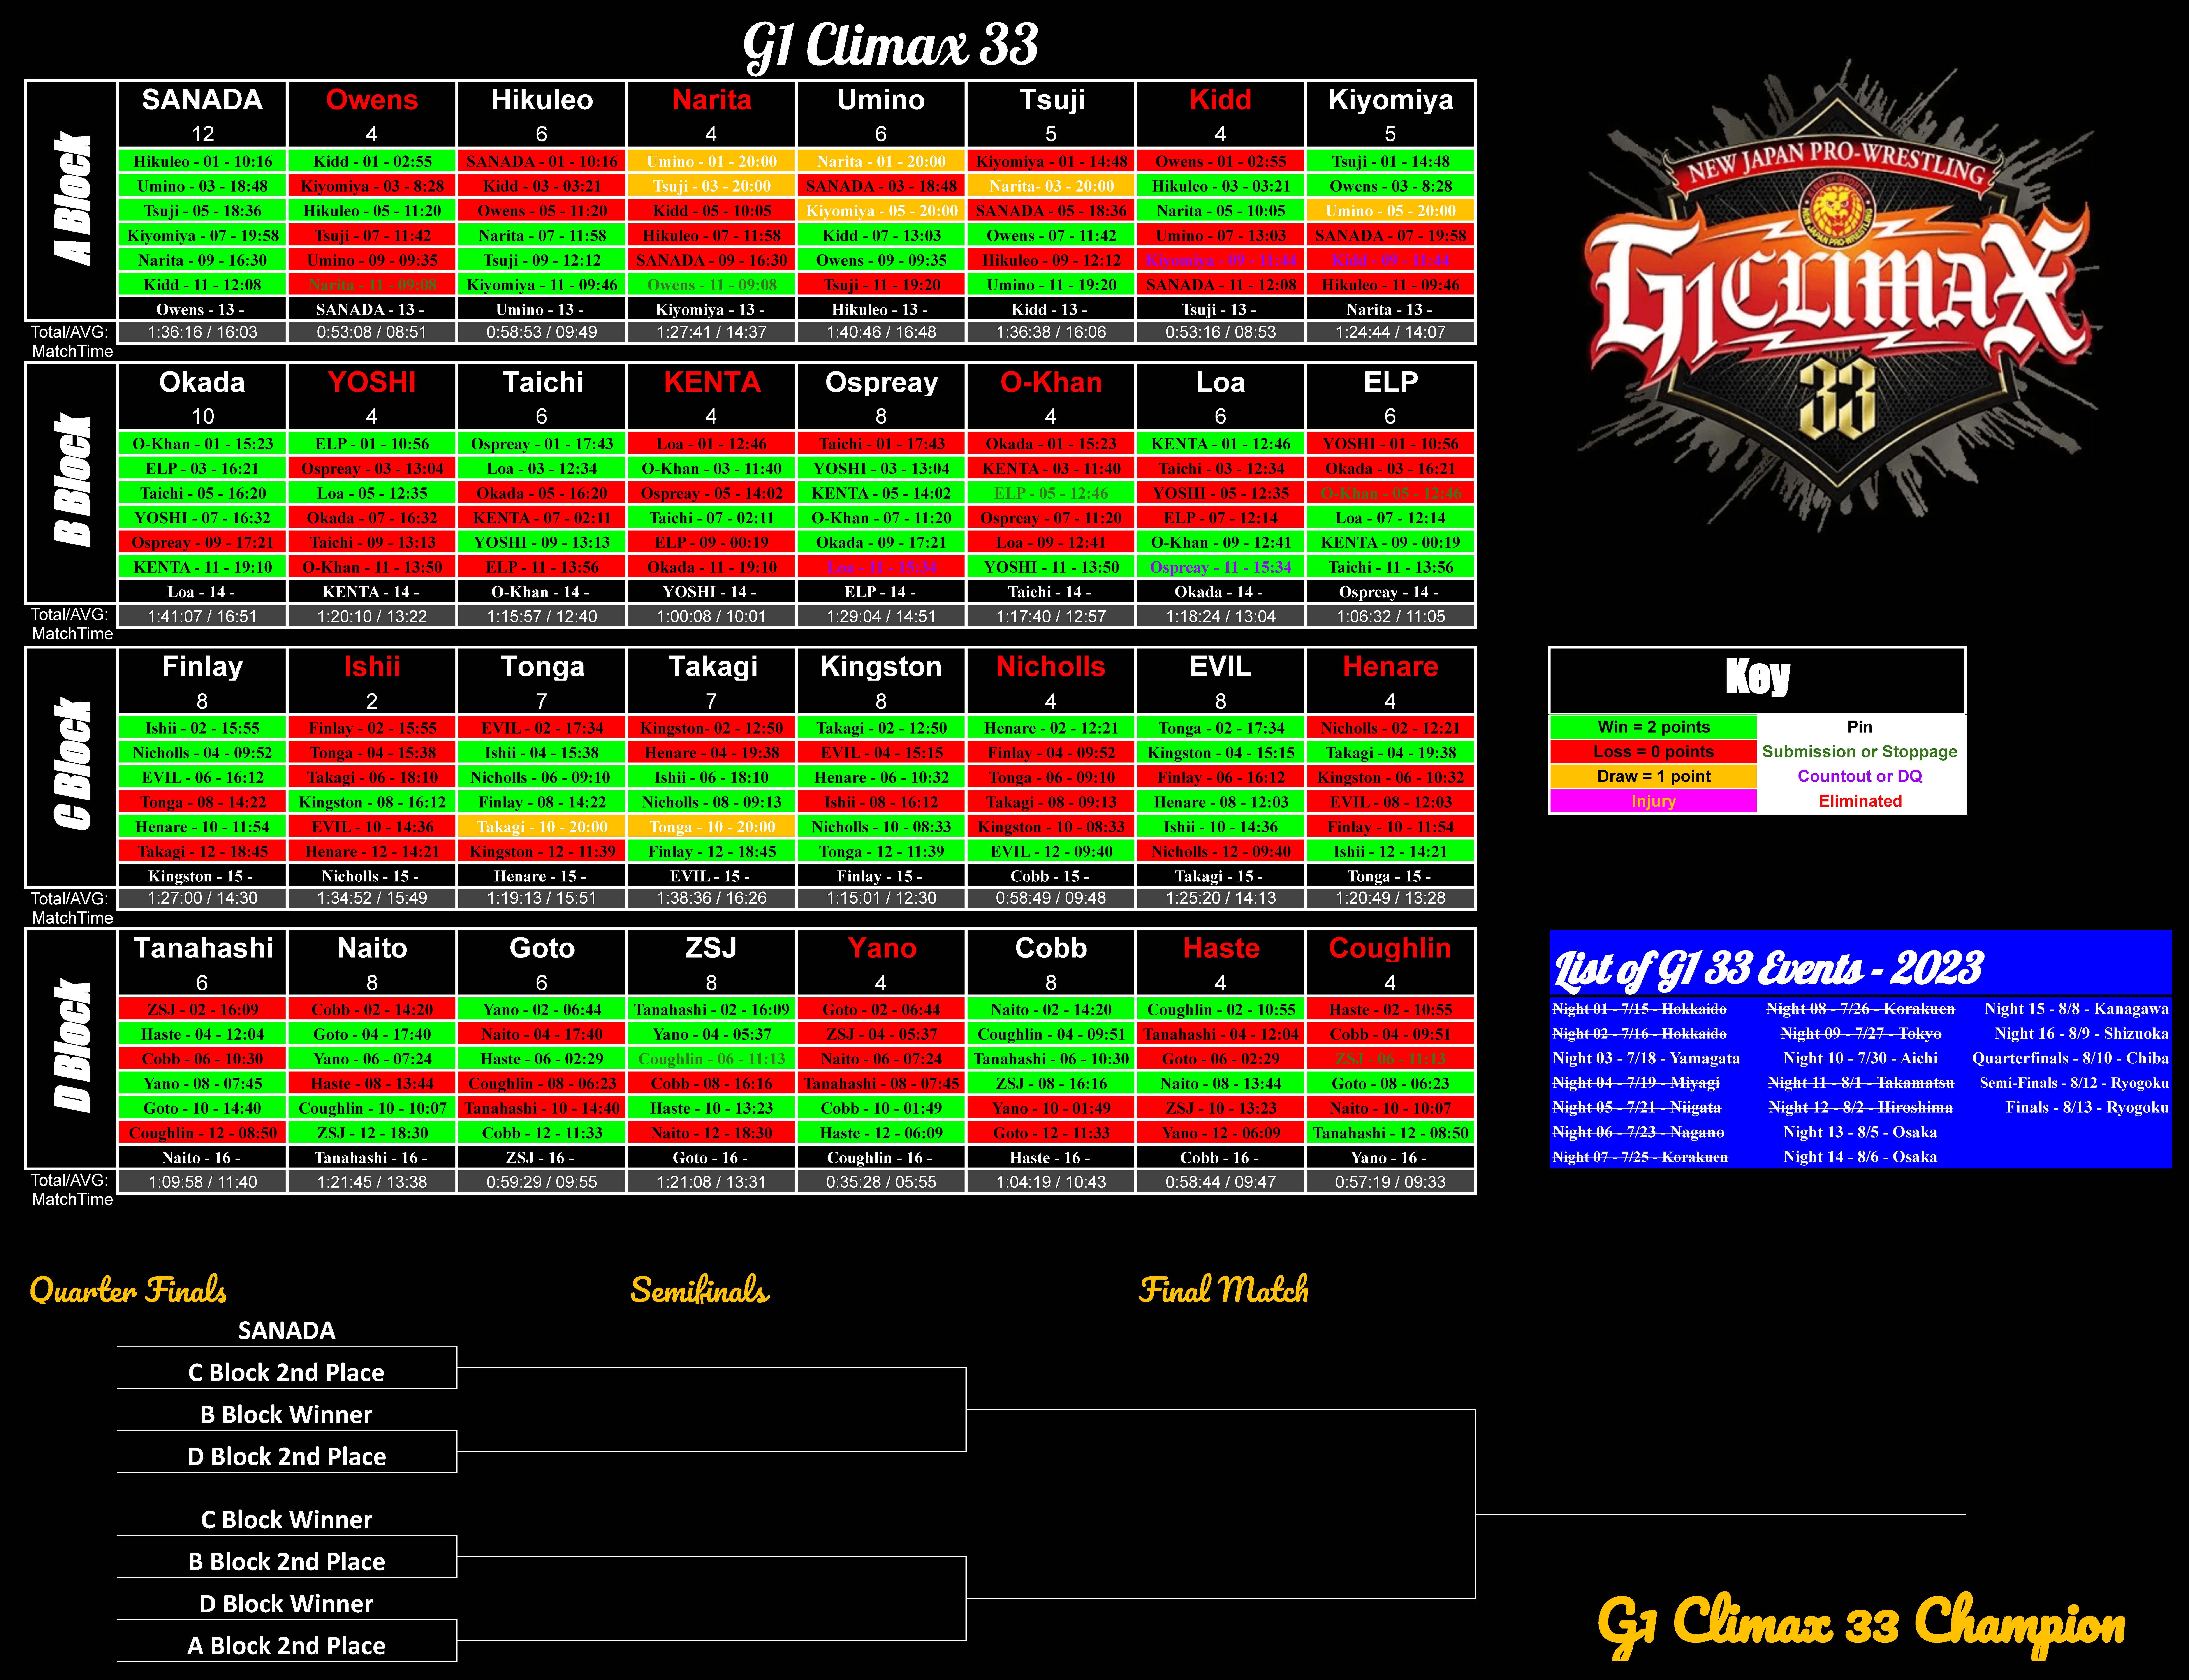 G1 Climax 33 Going Into Night 13